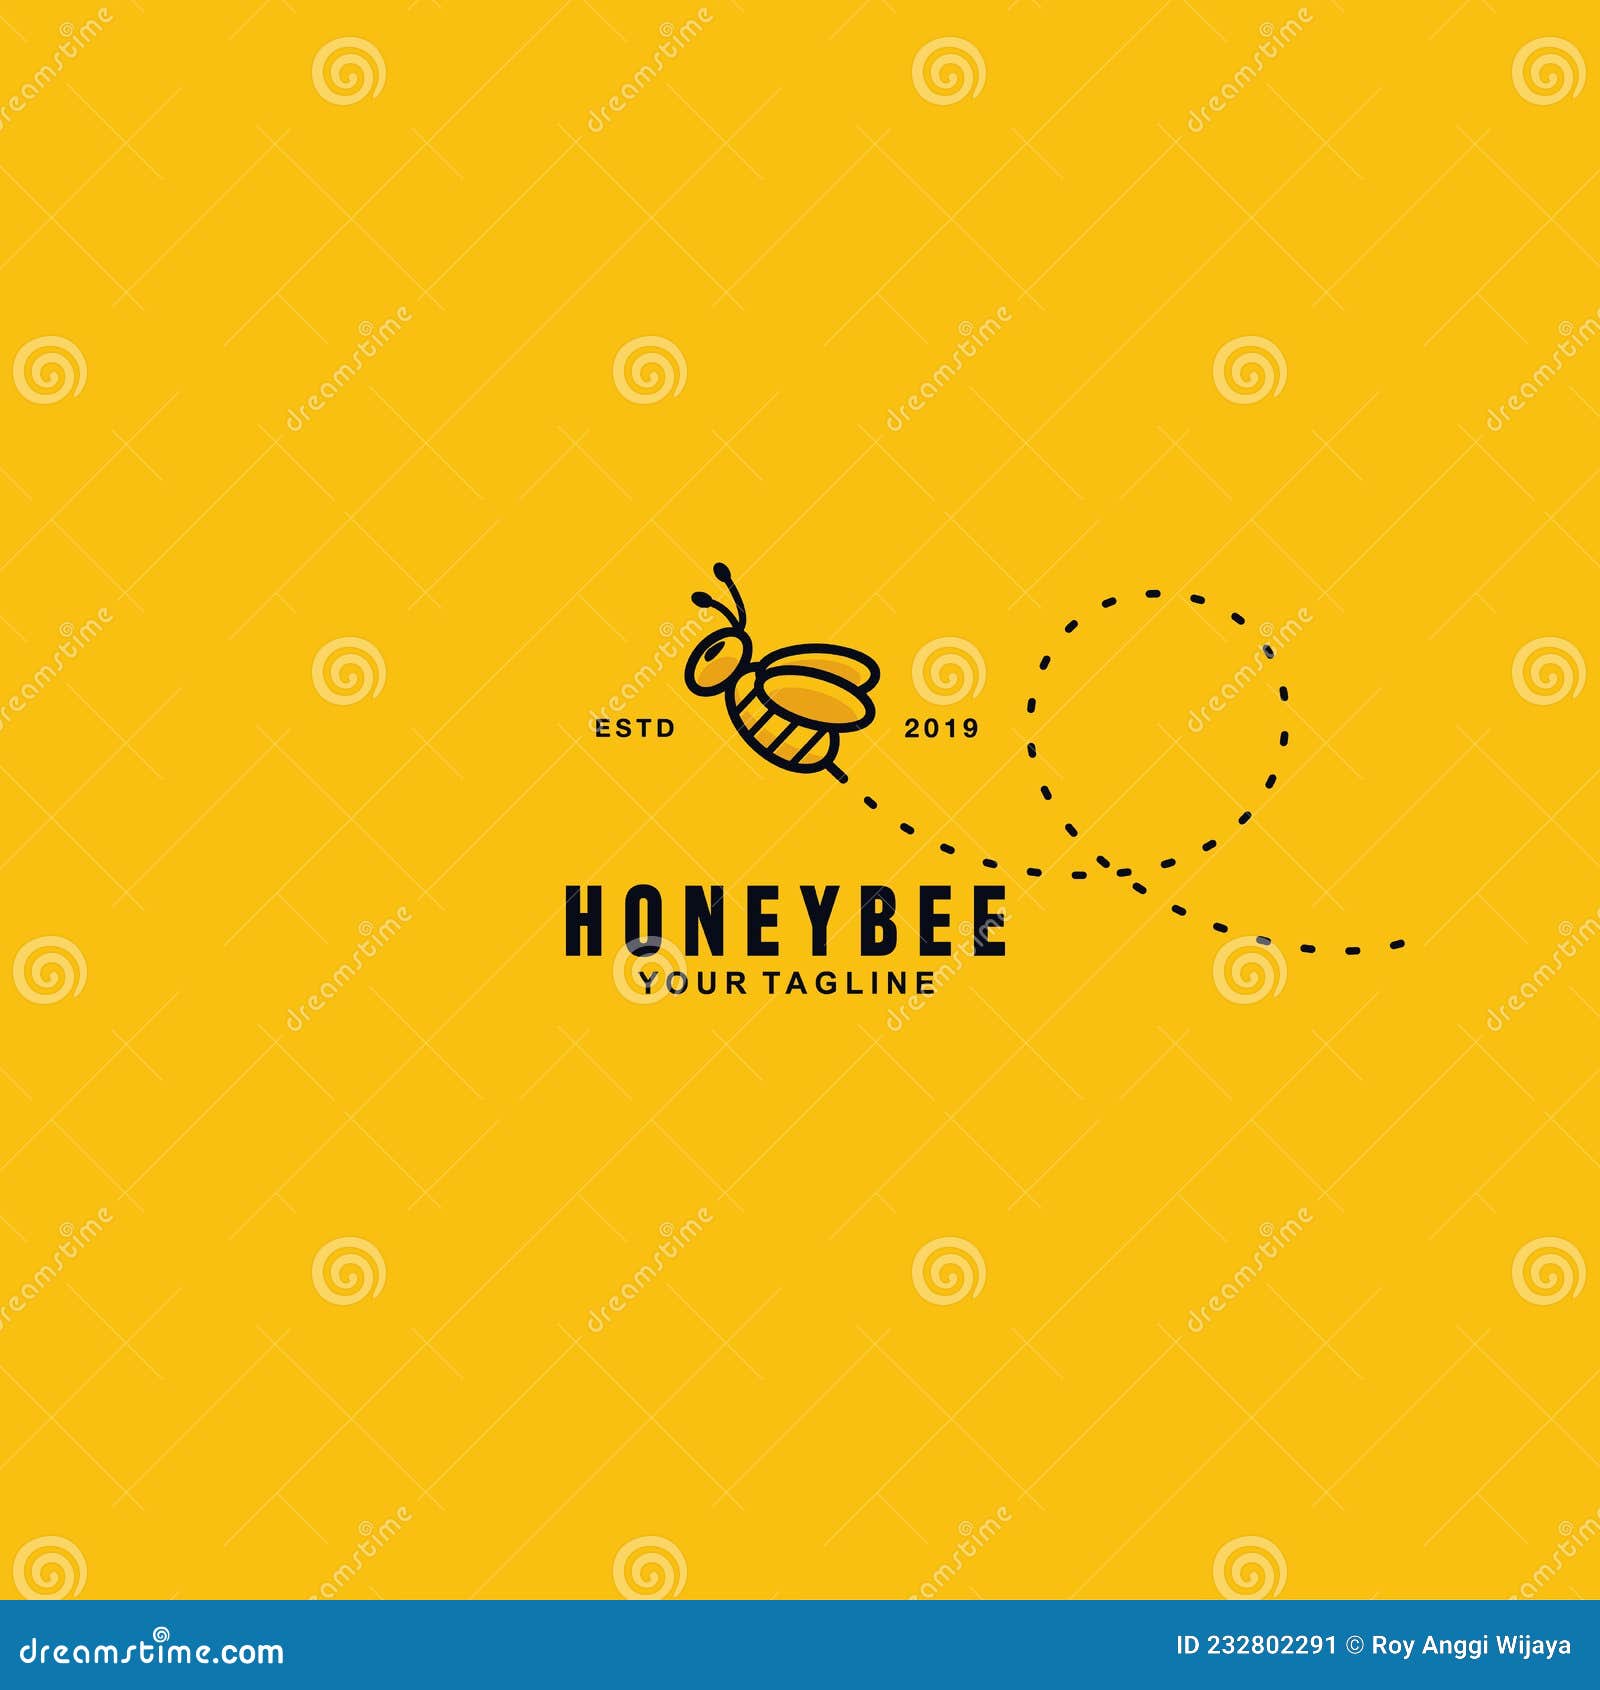 Cute Honey Bee Logo Design Template with Background and Shadow Stock Vector  - Illustration of graphic, farm: 232802291